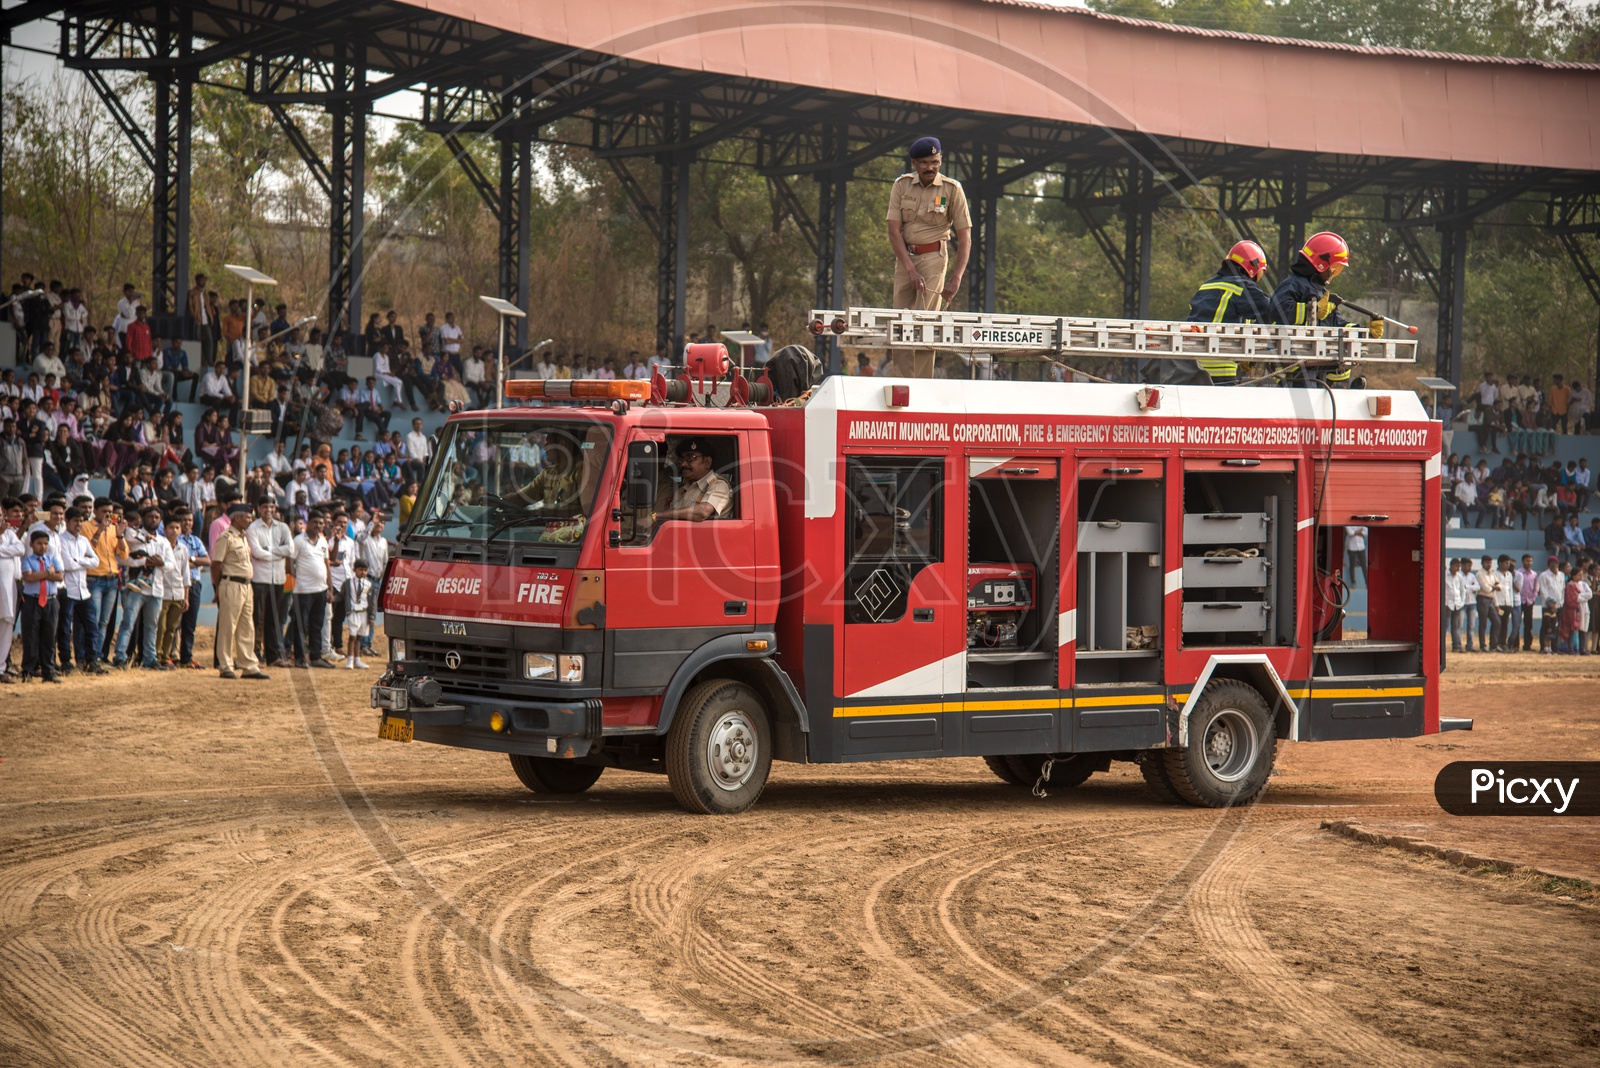 Fire Engine Or Fire Service Vehicle  Presentation in Independence Day  Parade